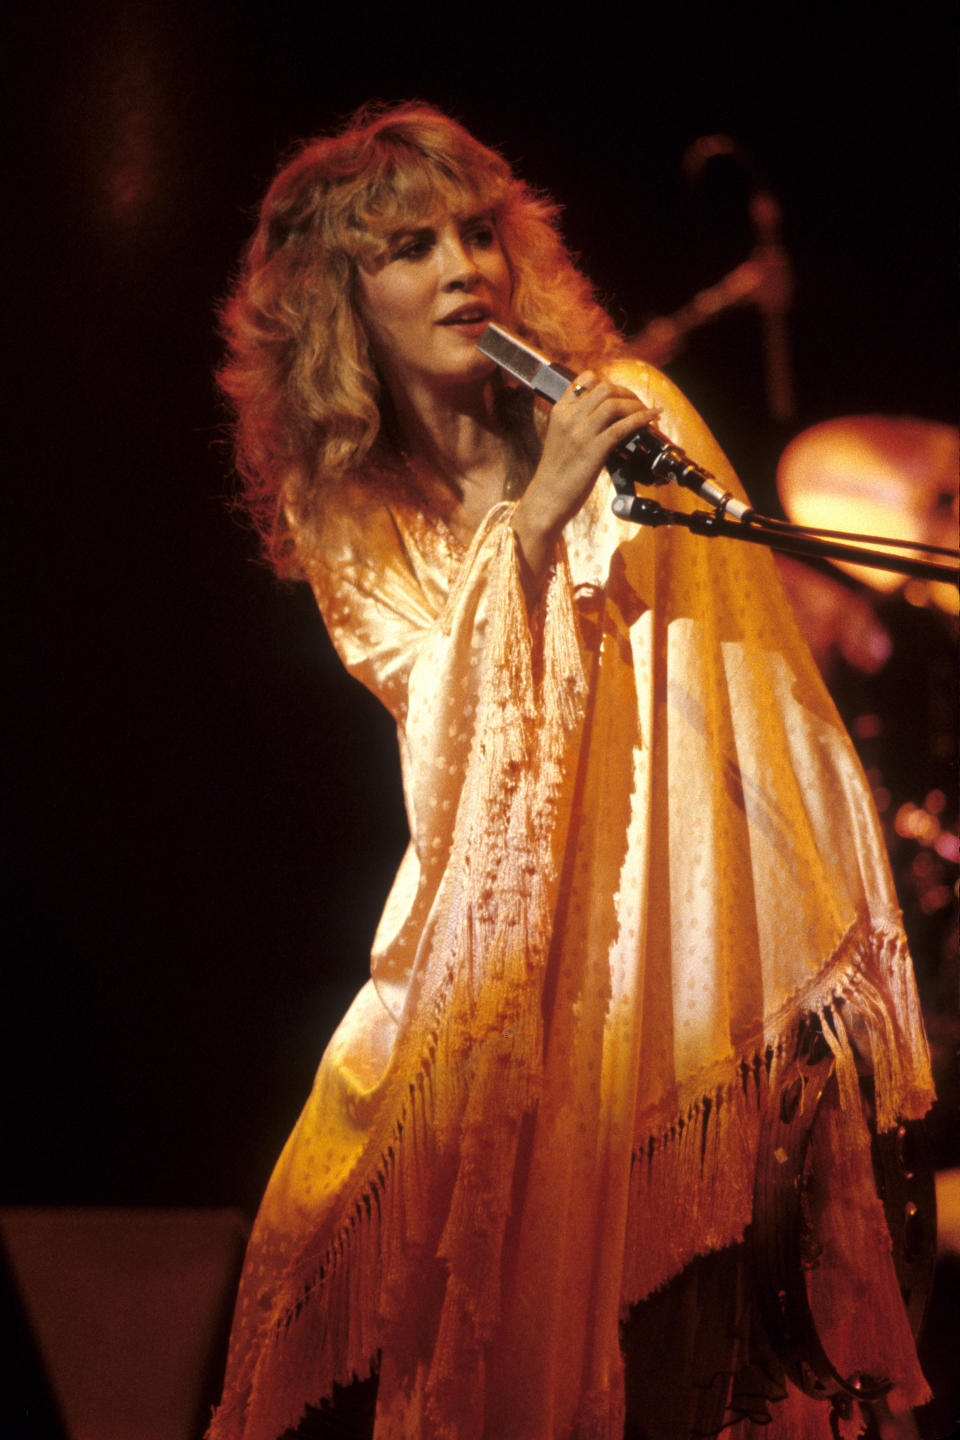 Nicks at the Oakland Coliseum on her first solo tour on Dec. 3, 1981.